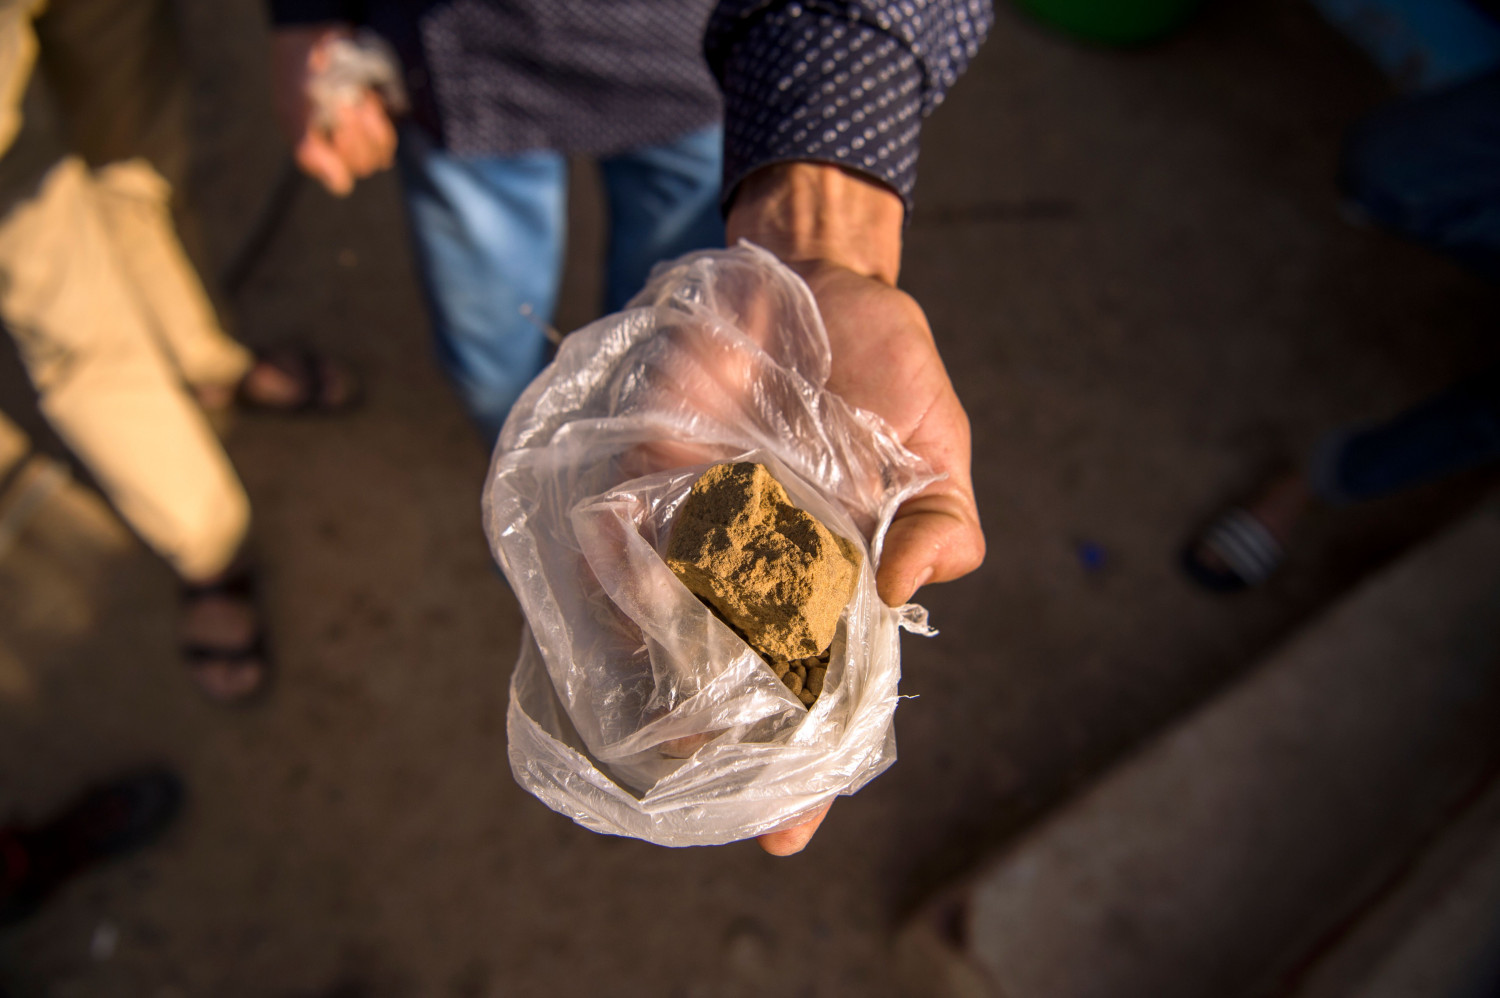 Scientists Find Dangerous Levels of Fecal Matter in Street Cannabis